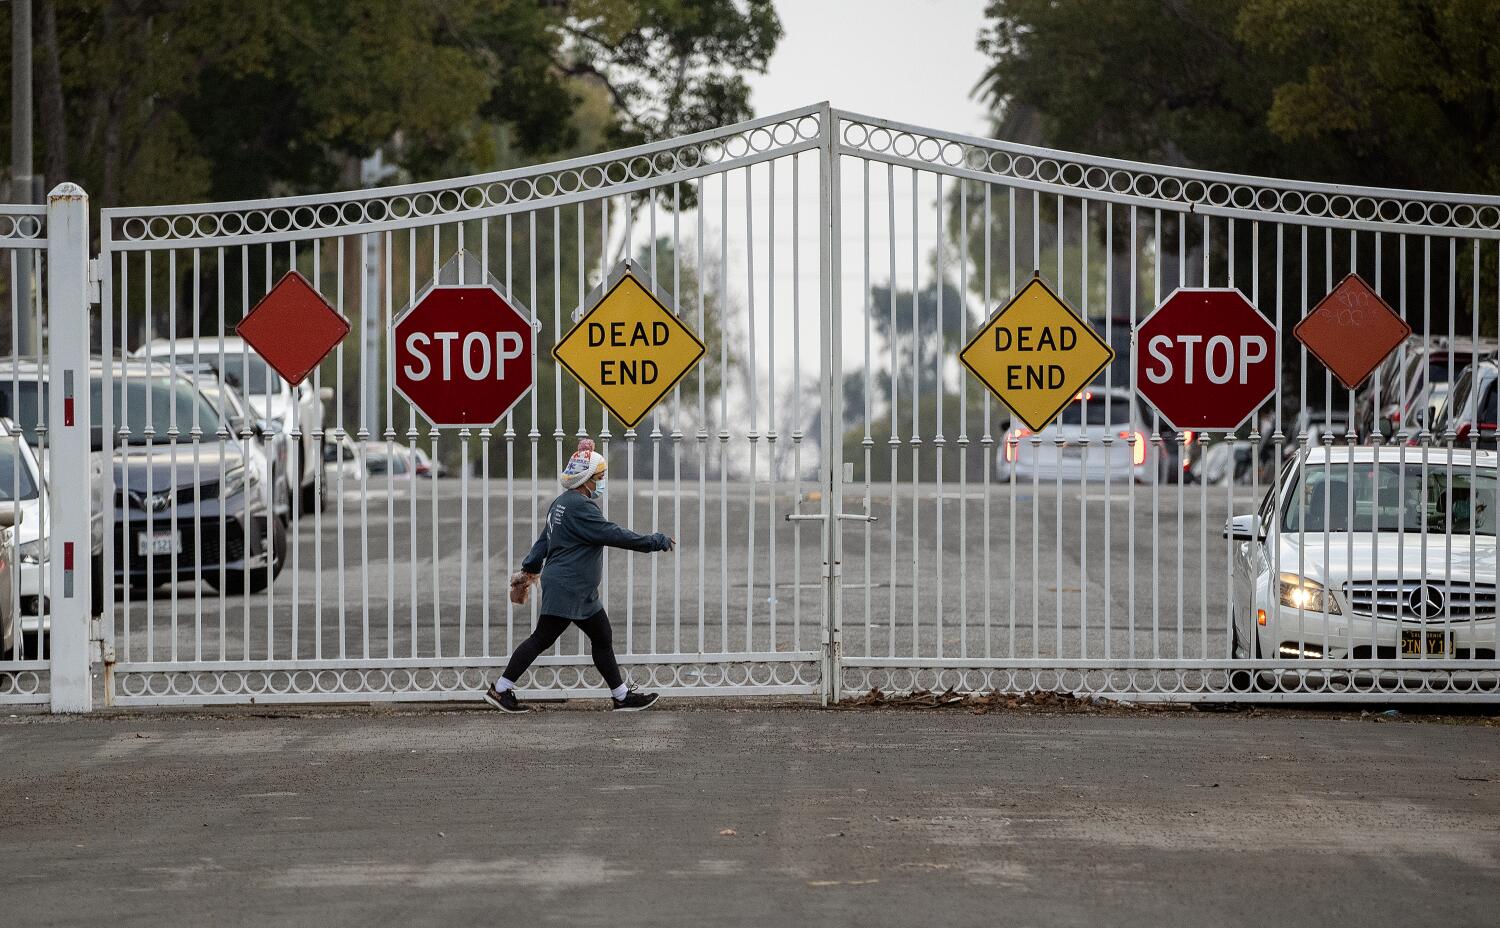 Locked gates in historic L.A. neighborhood spark debate in City Council election